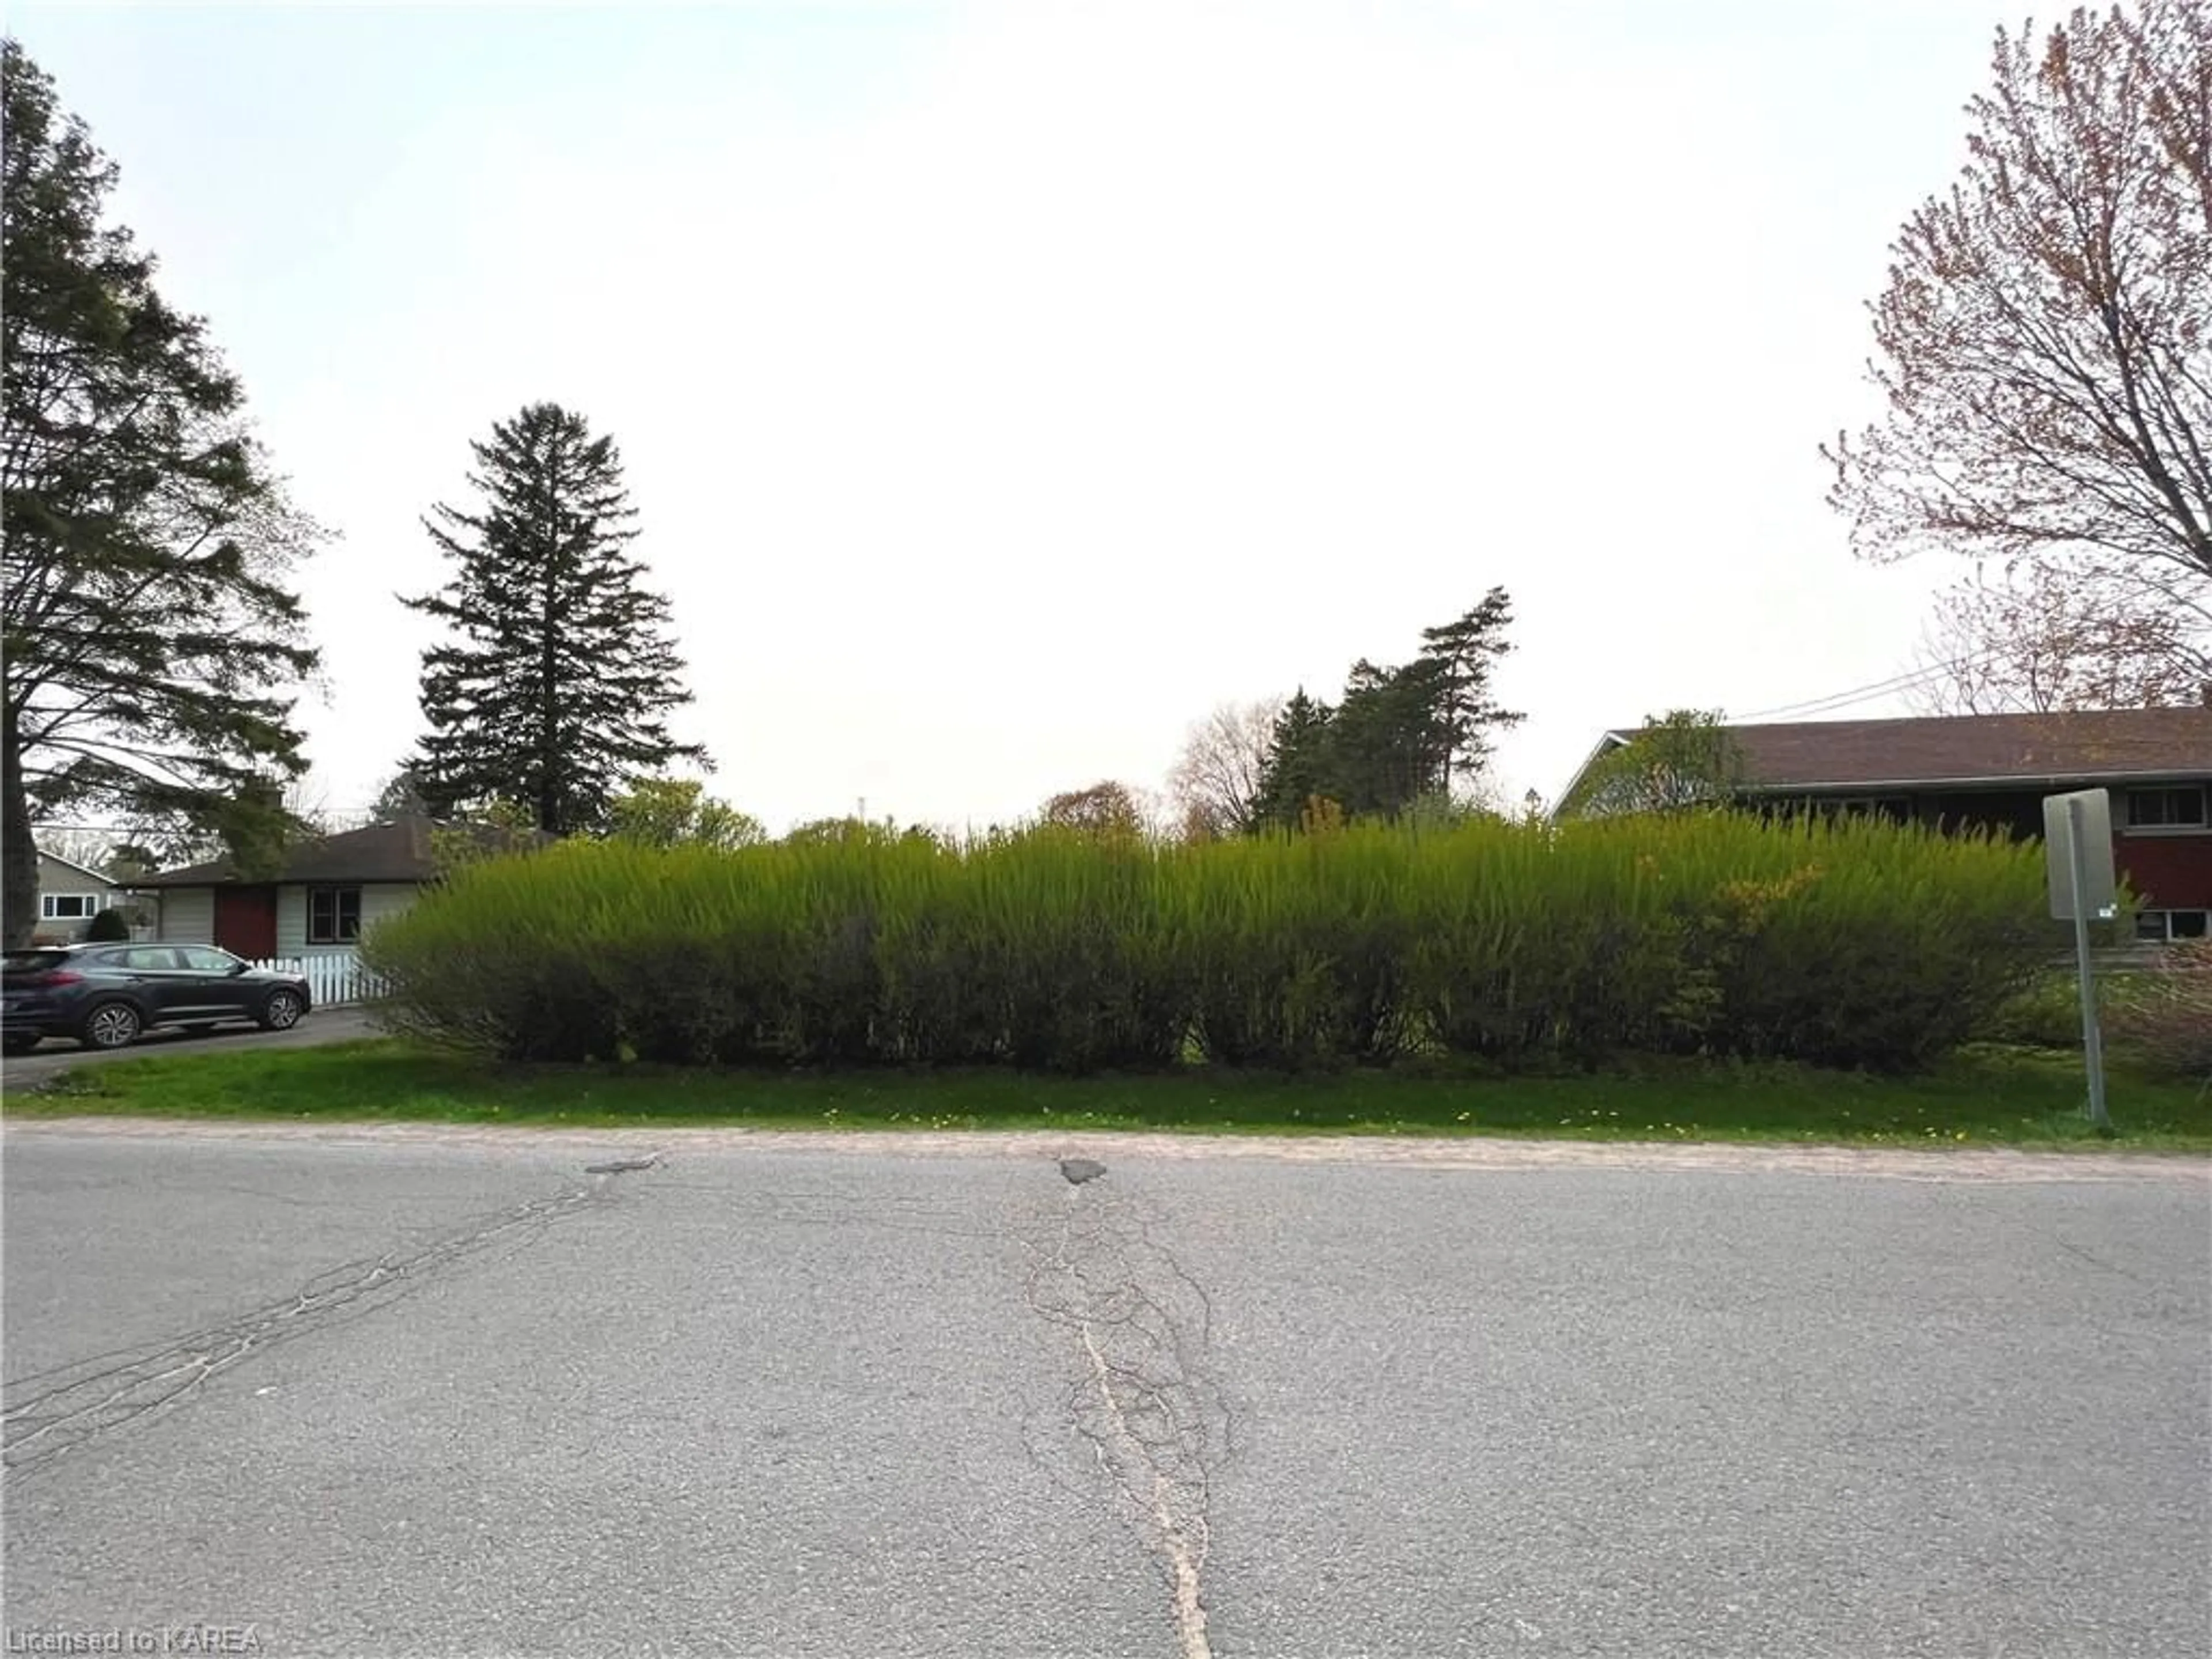 A view of a street for 53 Lakeview Ave, Kingston Ontario K7M 3T4